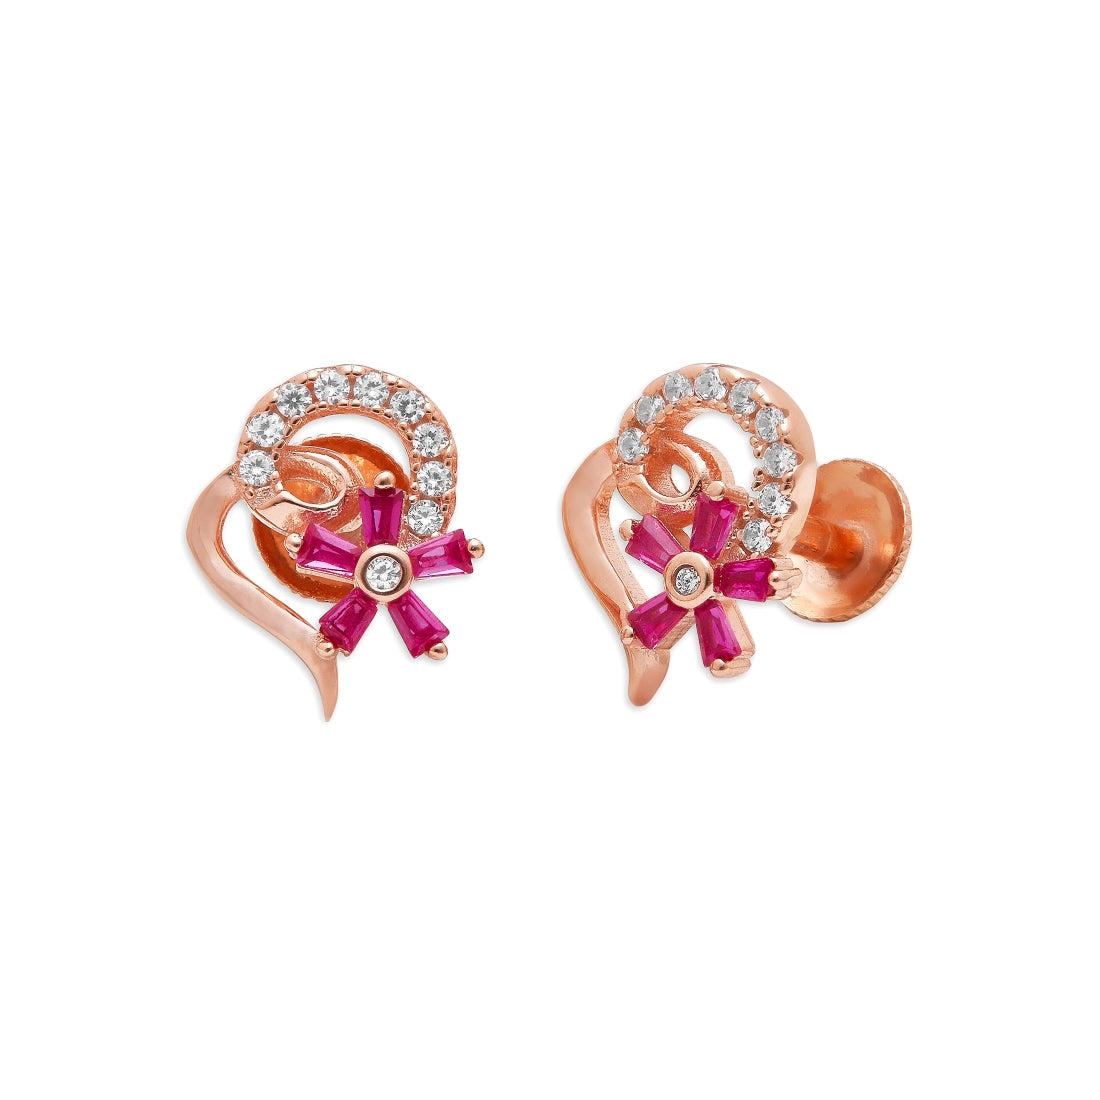 Blooming Love 925 Sterling Silver Earrings with Cubic Zirconia